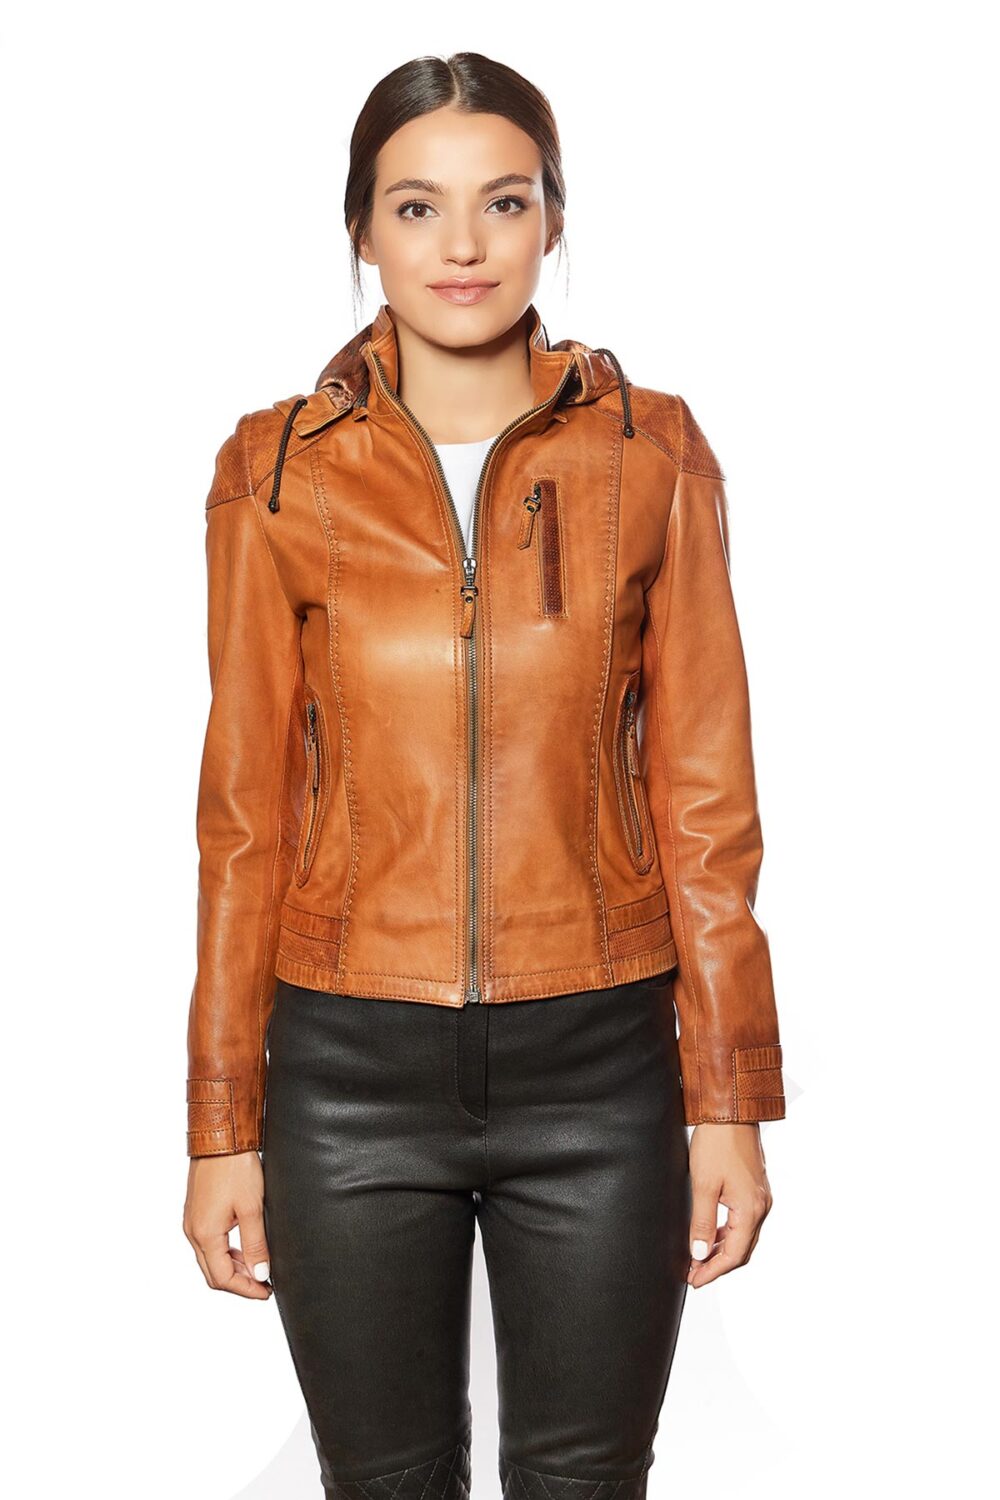 Petite Leather Jackets - Leather Jackets for Petite Women